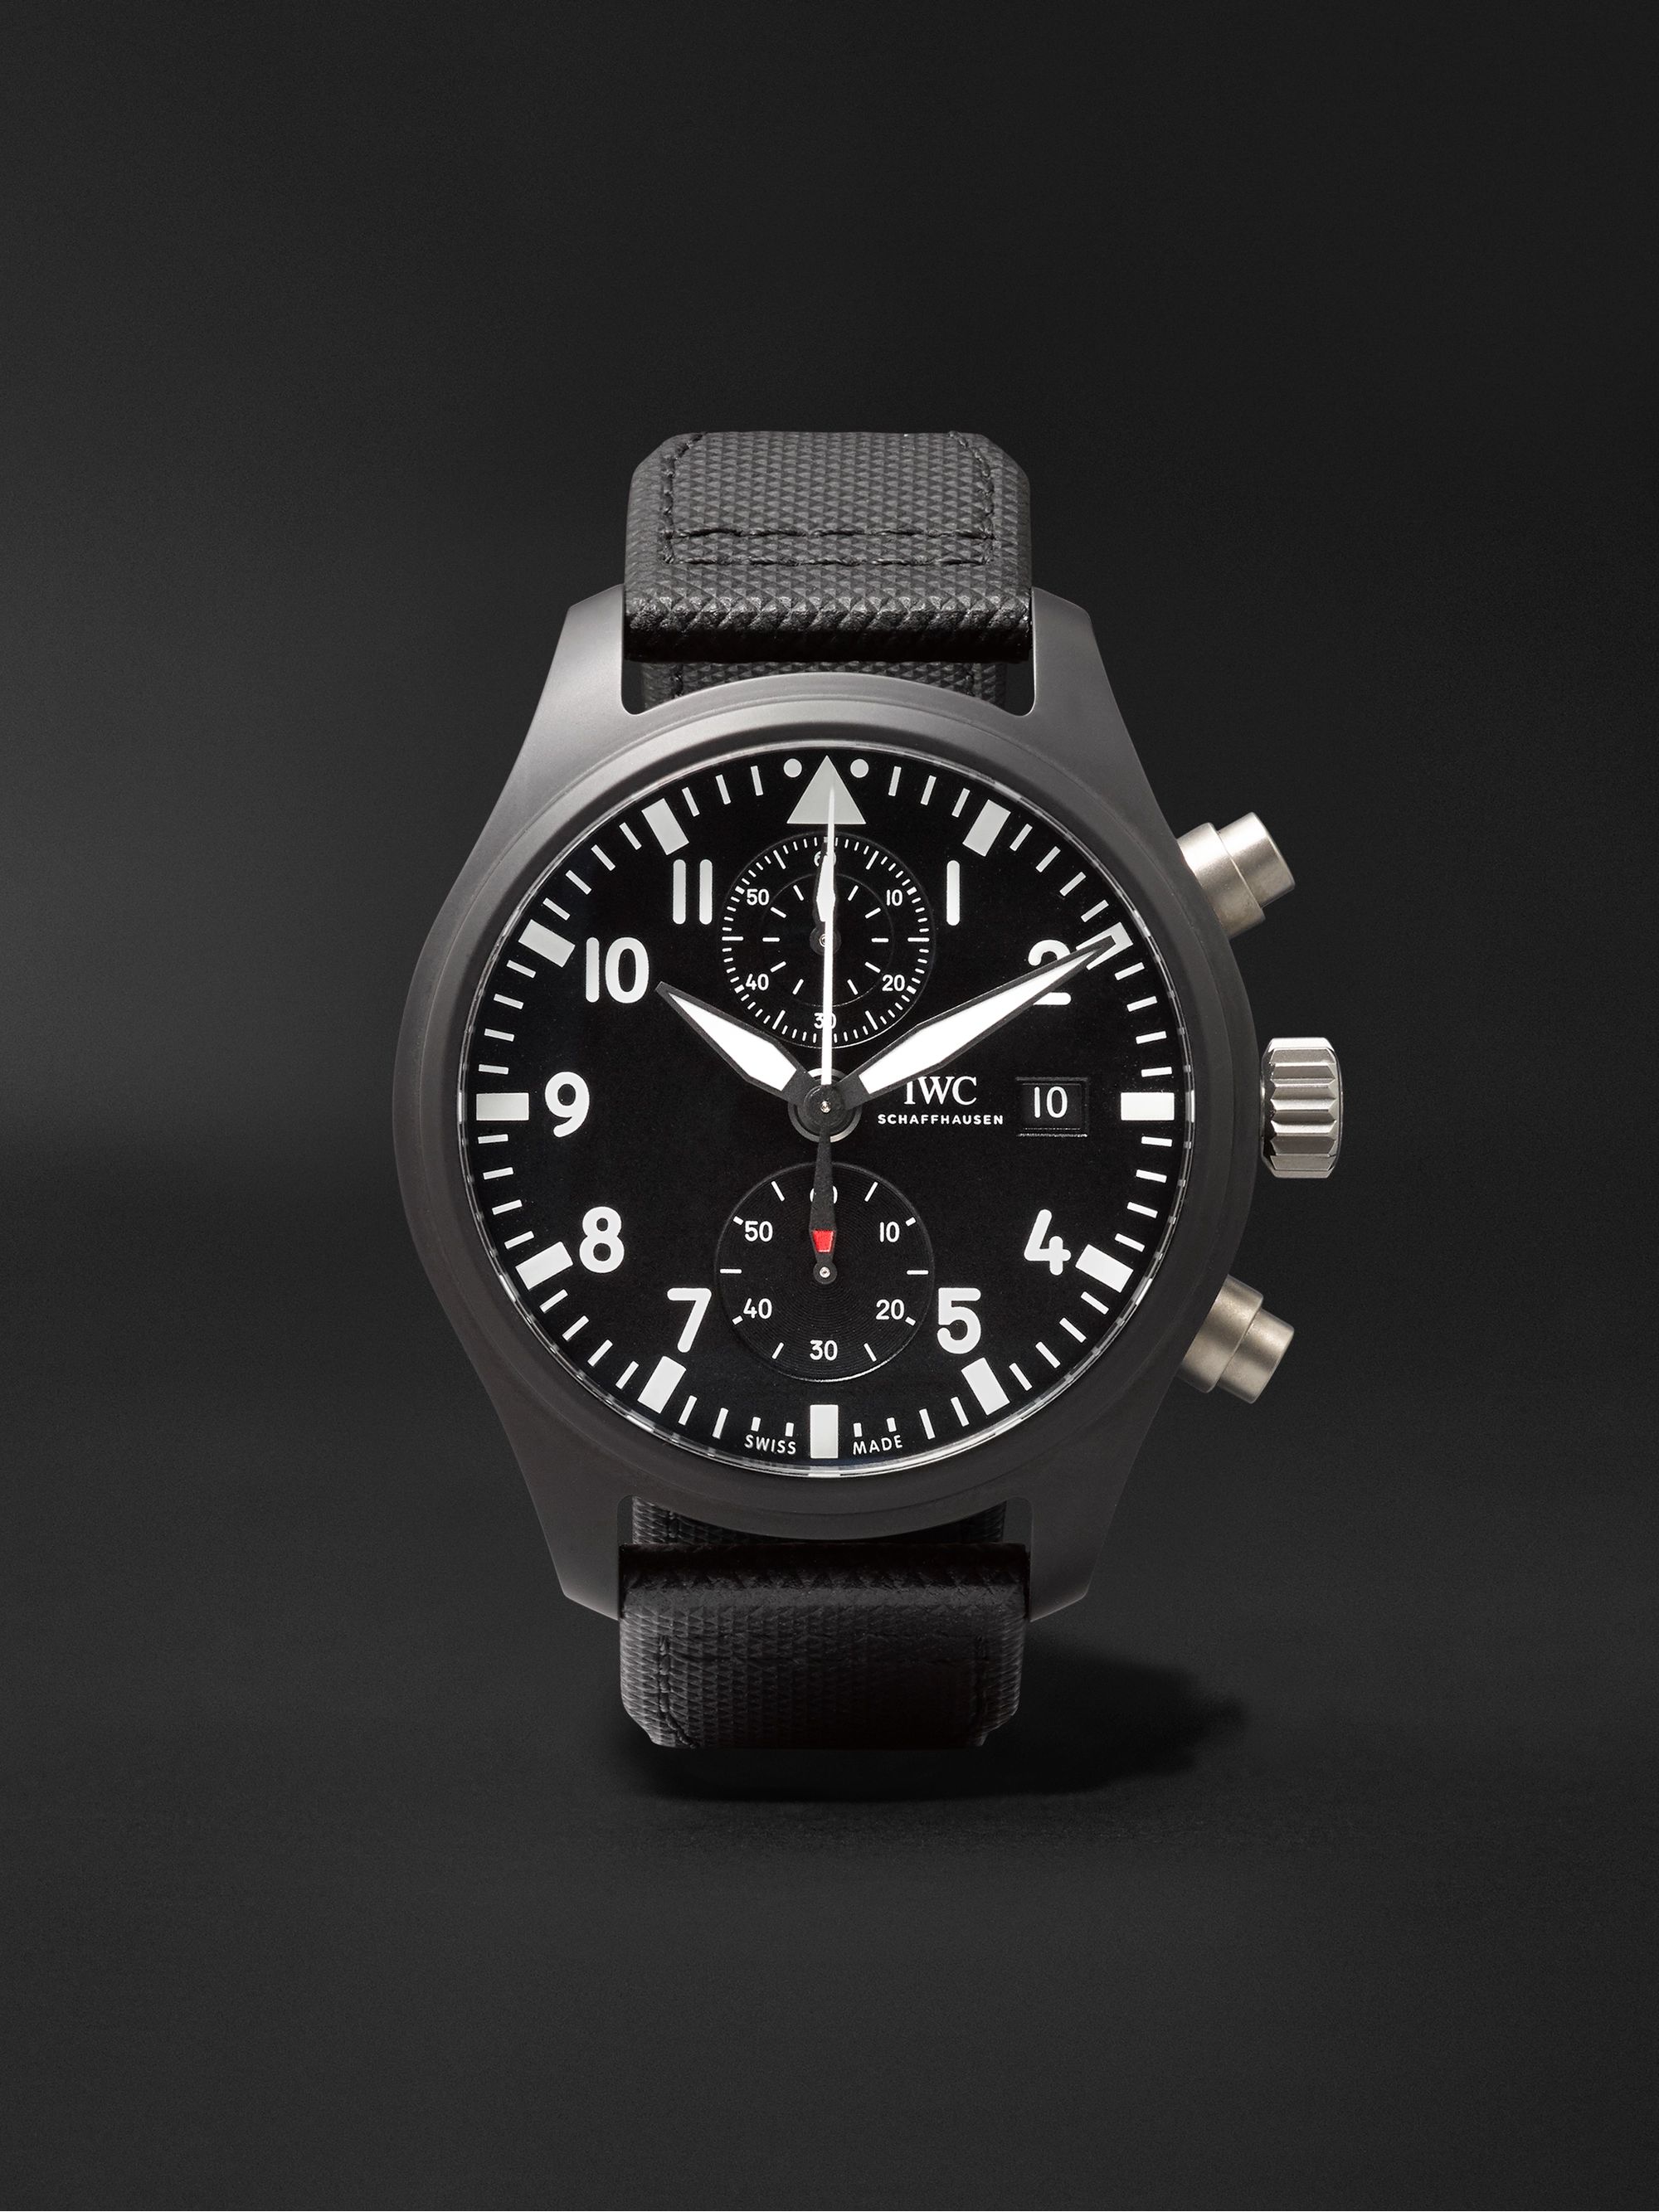 IWC SCHAFFHAUSEN Pilot's TOP GUN Automatic Chronograph 44mm Ceramic and Leather Watch, Ref. No. IW389001